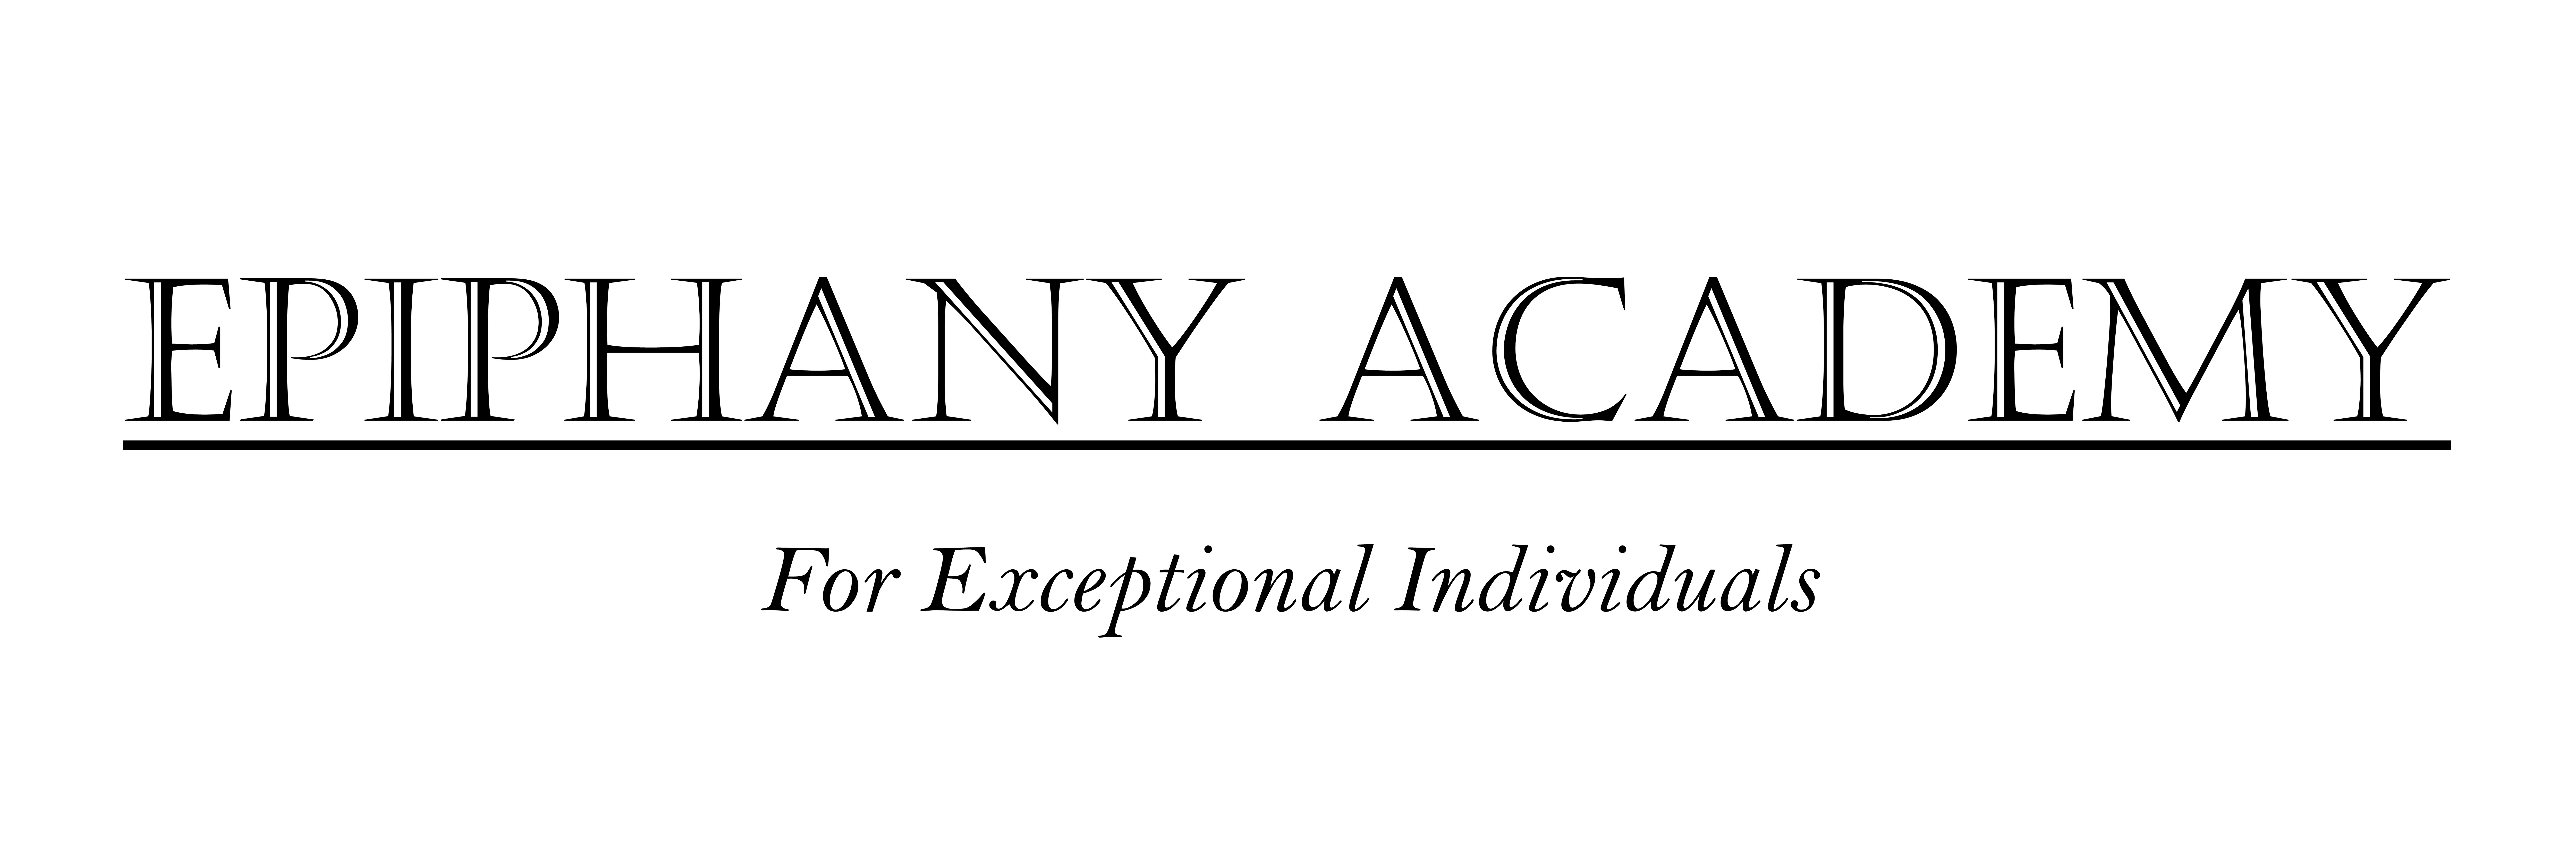 Epiphany Academy for Exceptional Individuals